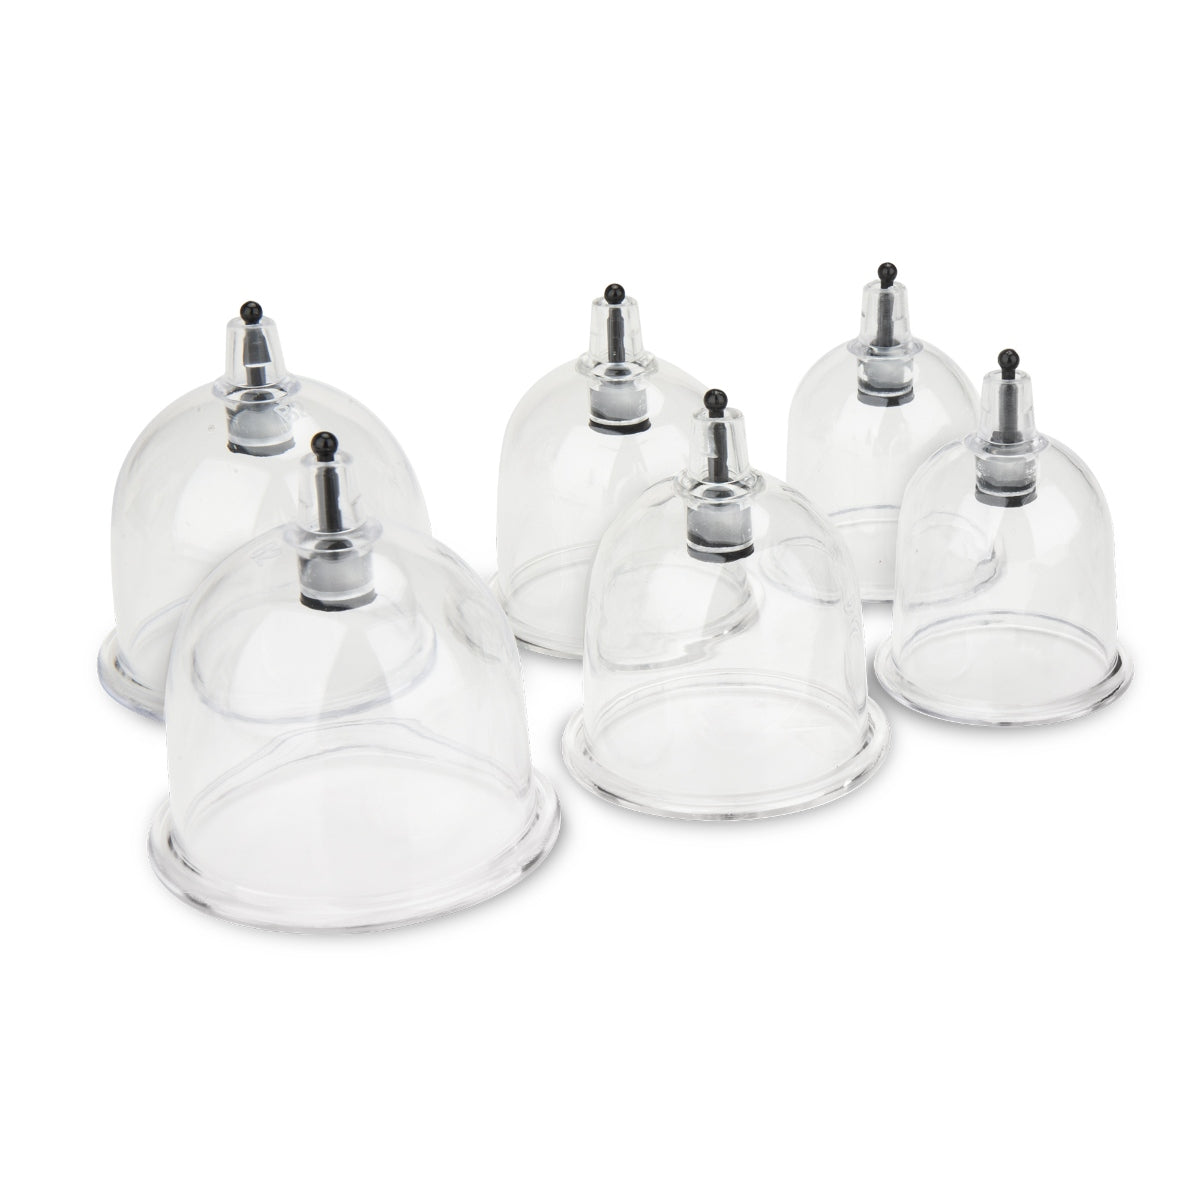 Electro Medical Lux Fetish Erotic Suction Cupping Set   